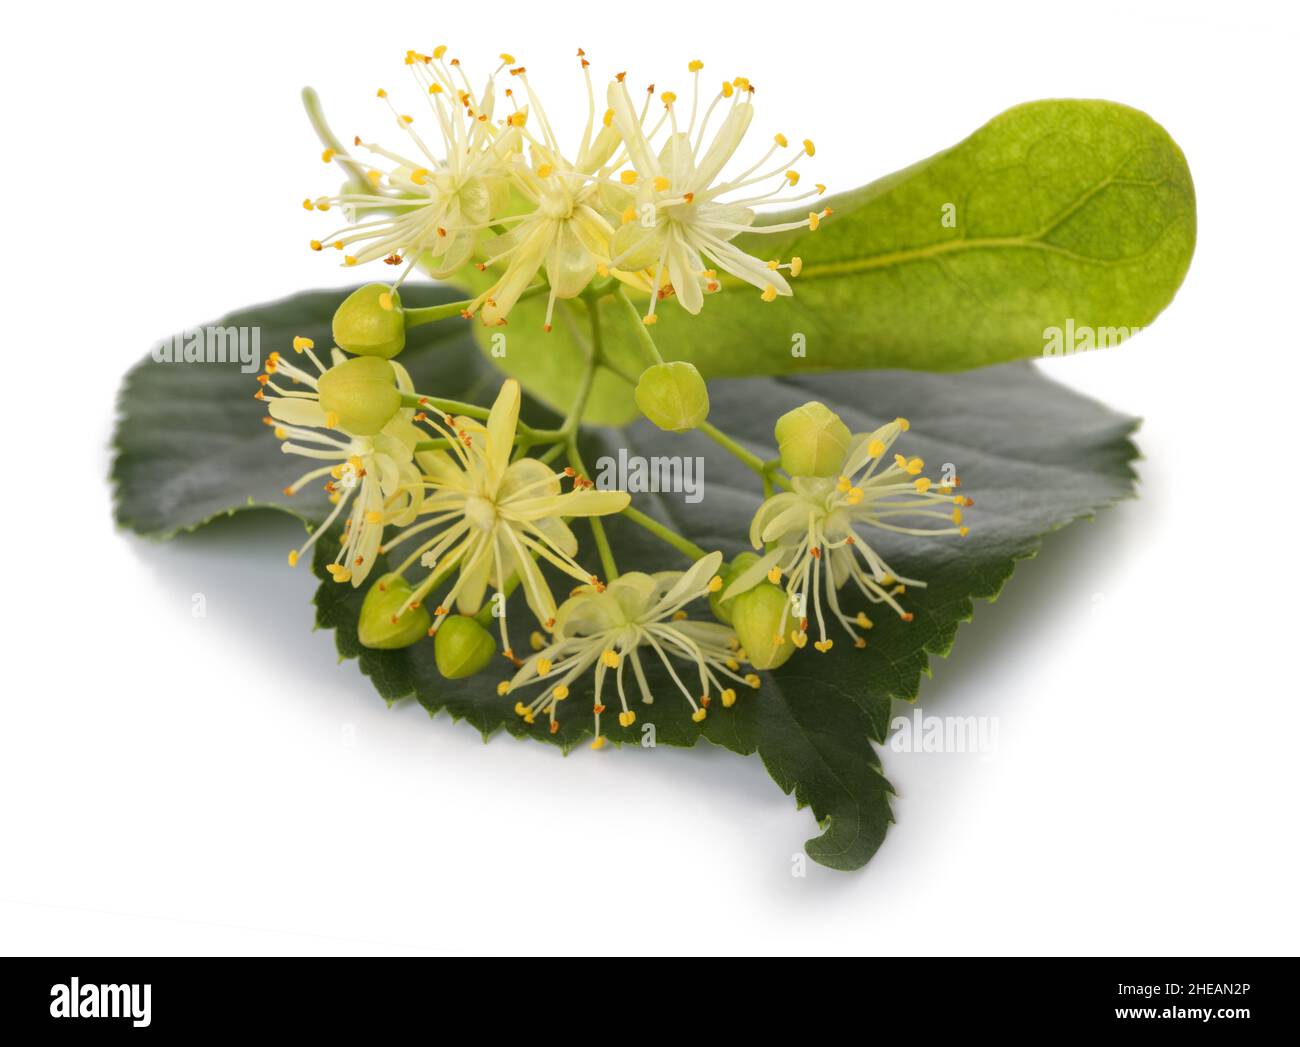 Linden leaf with  flowers  isolated on white background Stock Photo